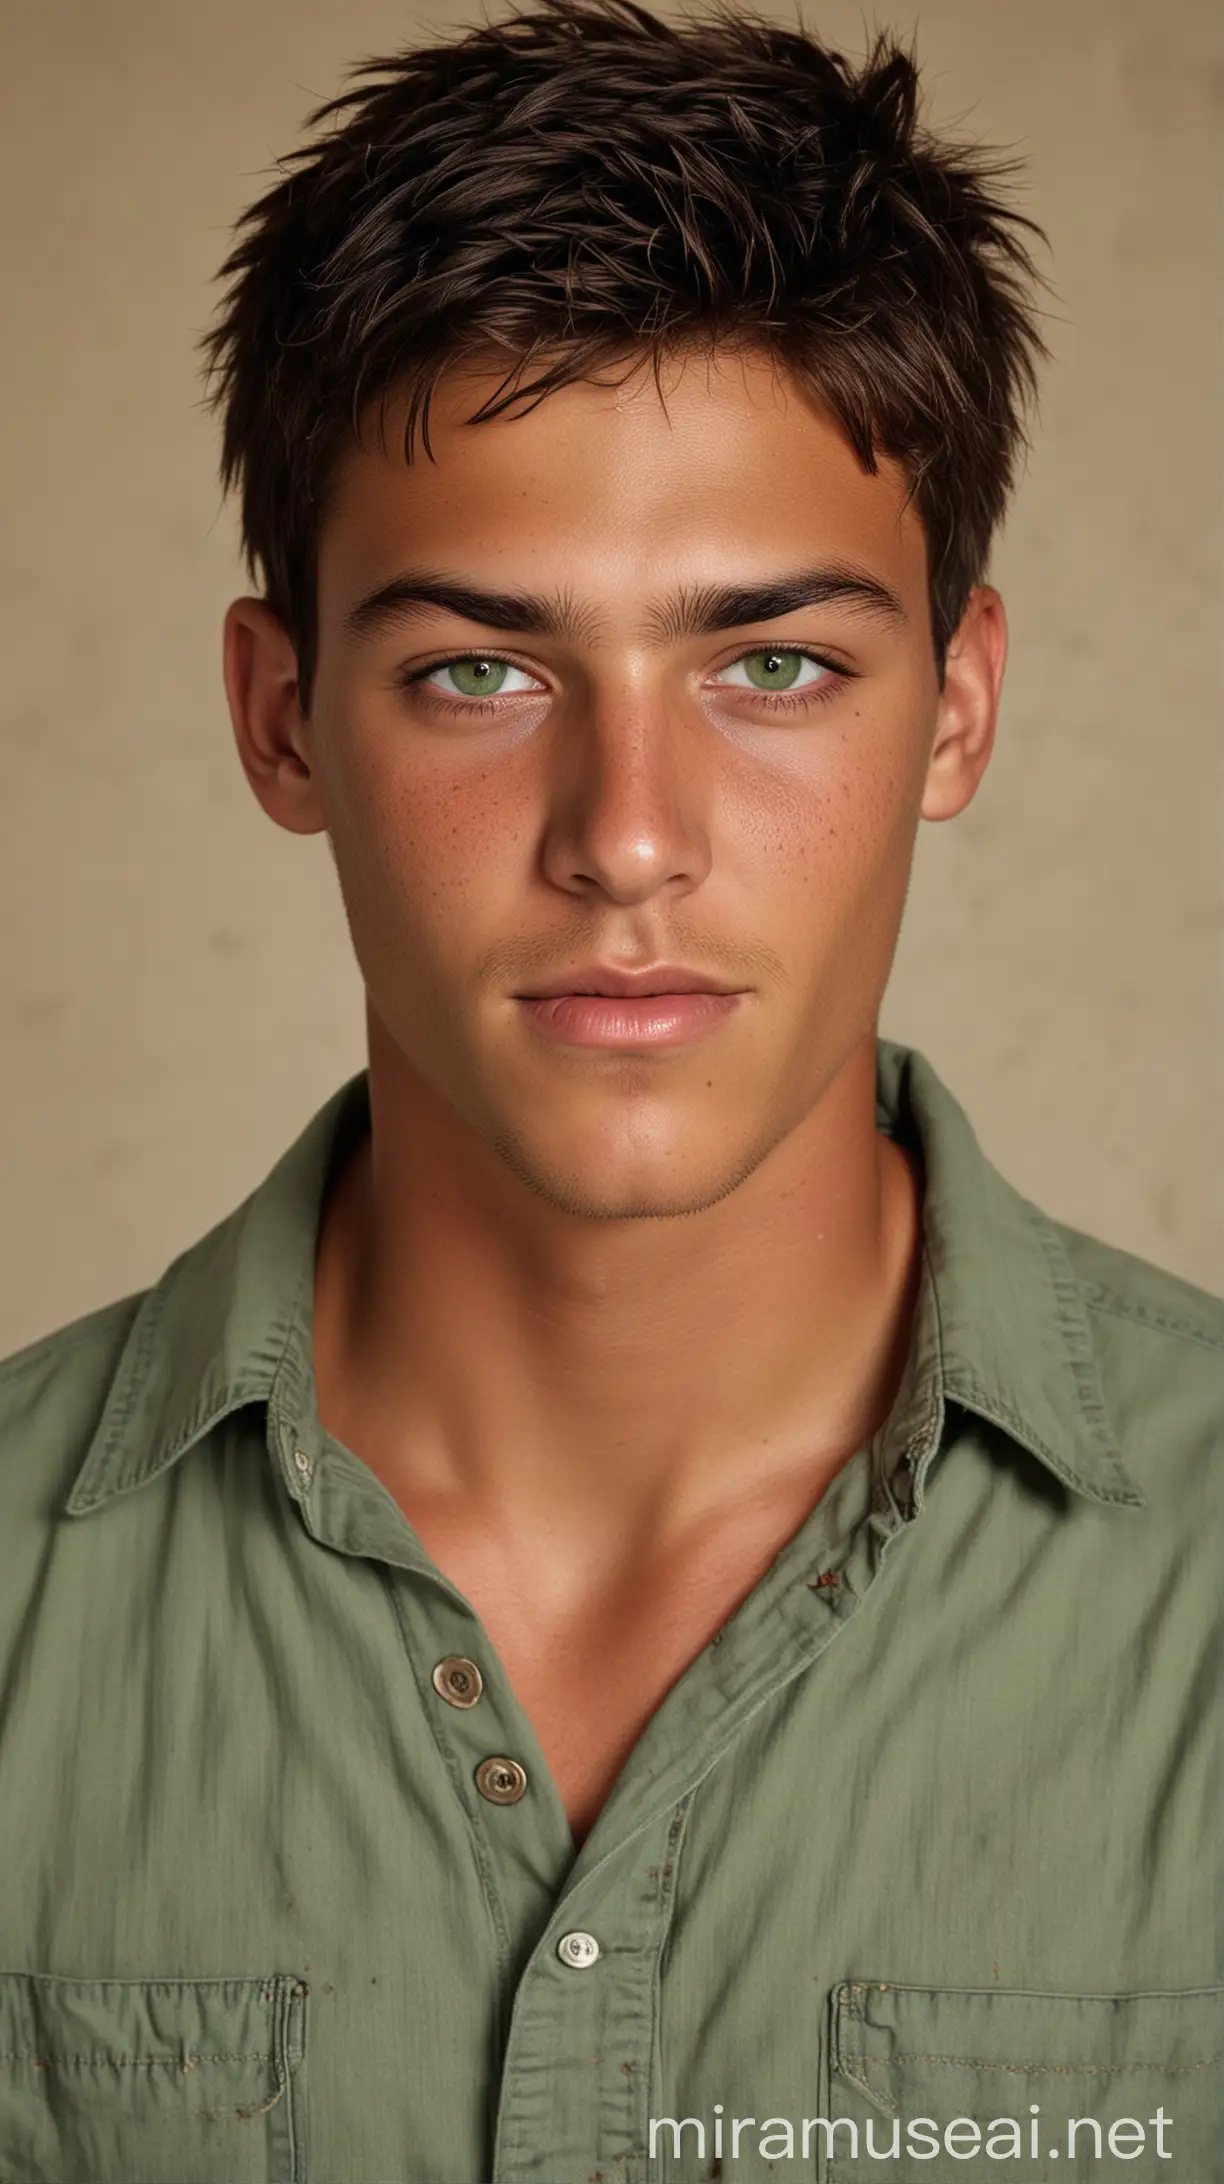 Handsome Teen with Tanned Skin and Green Eyes in Worn Clothing